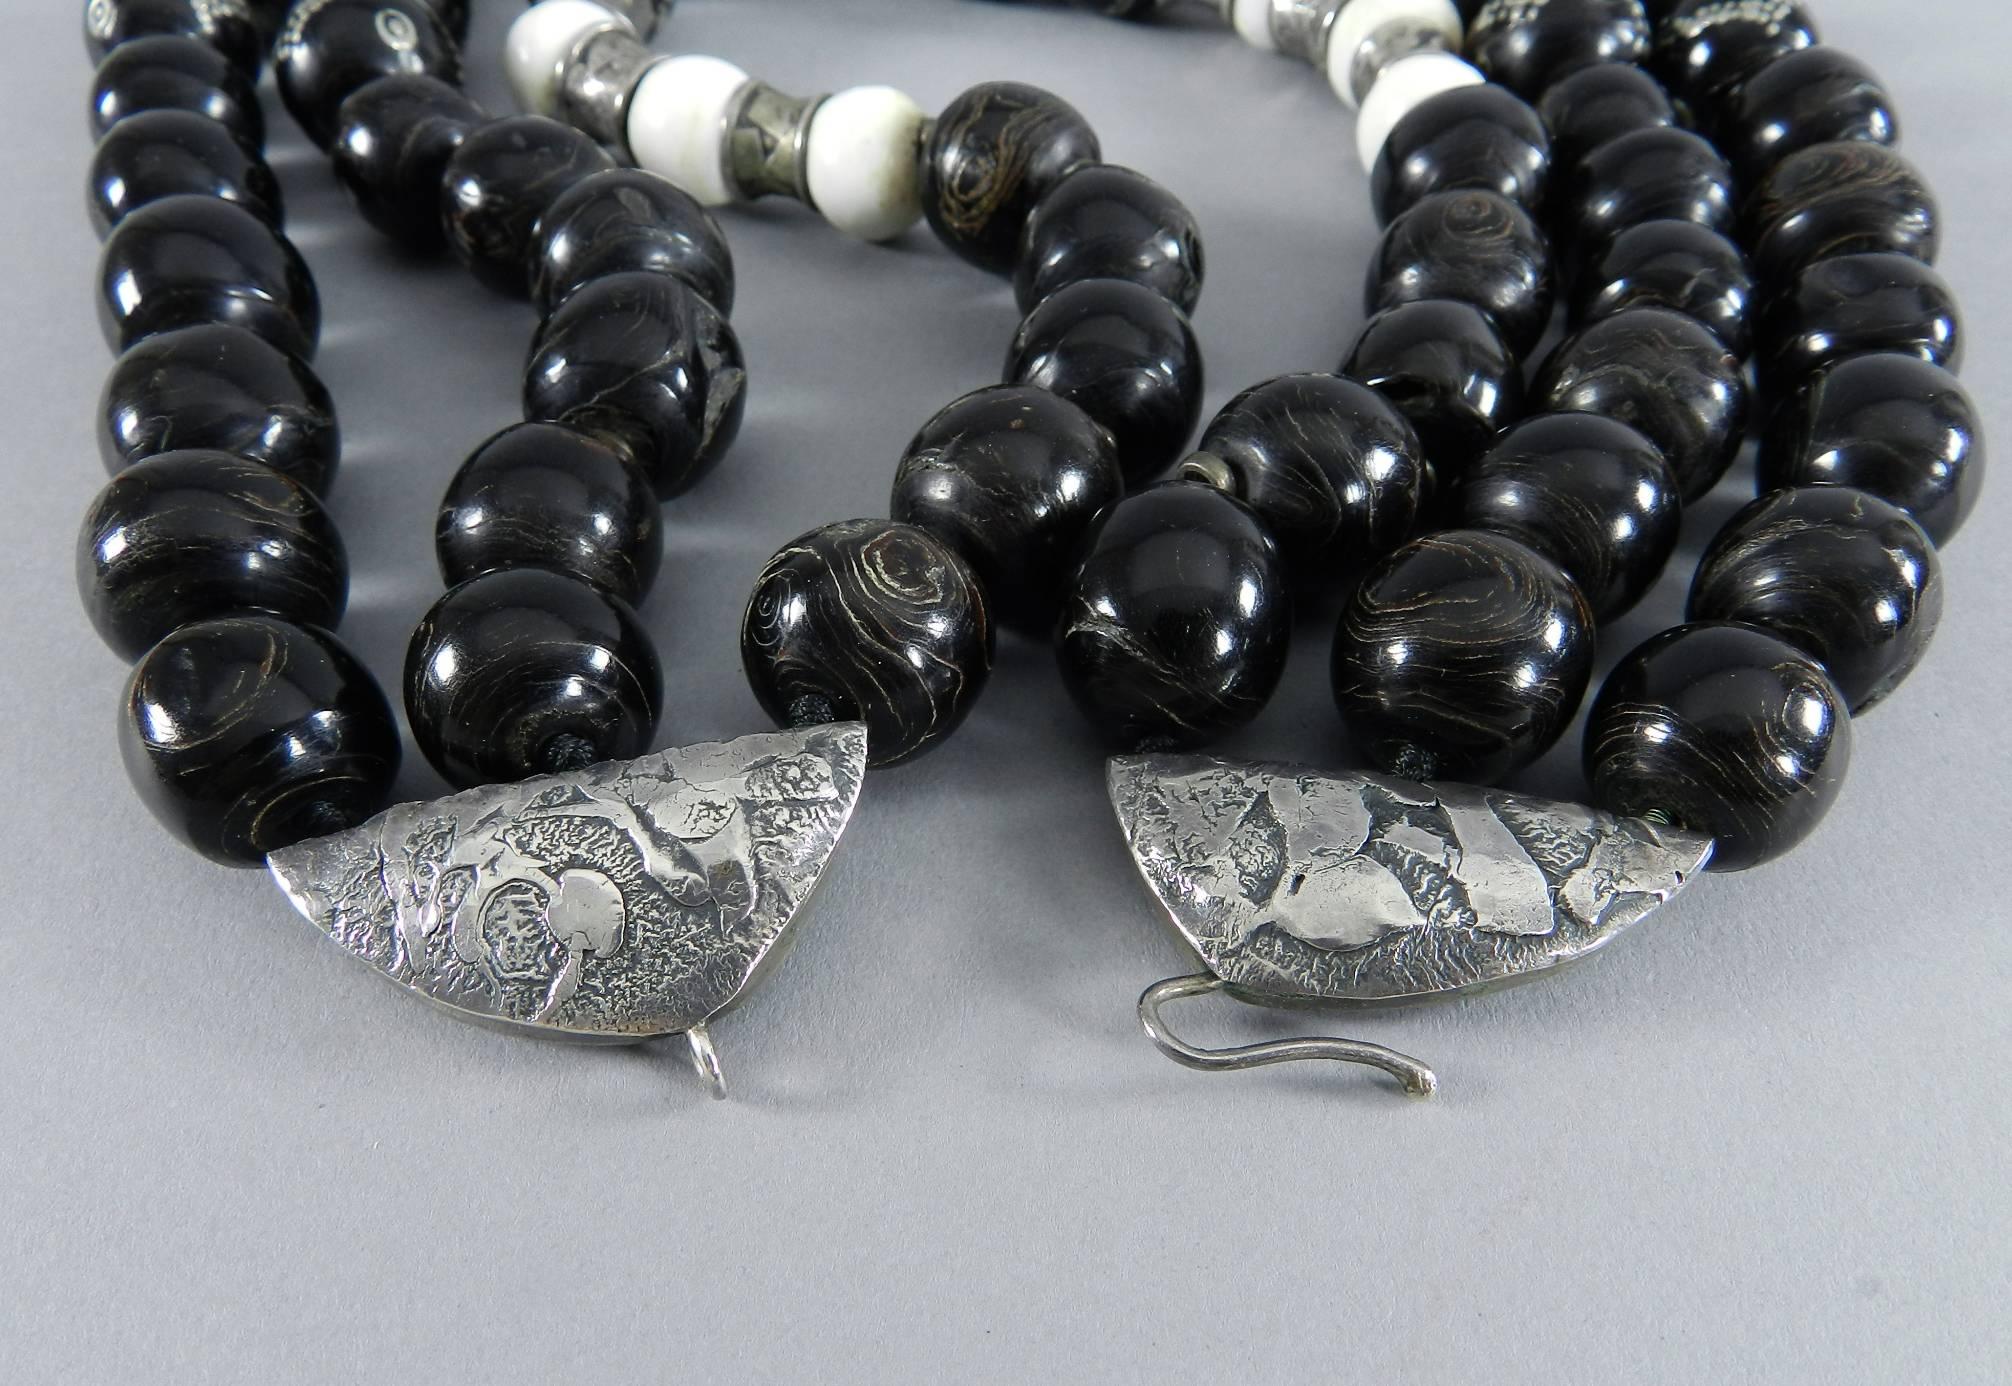 Women's Eileen Coyne Sterling and Antique African Beads Necklace and Earrings